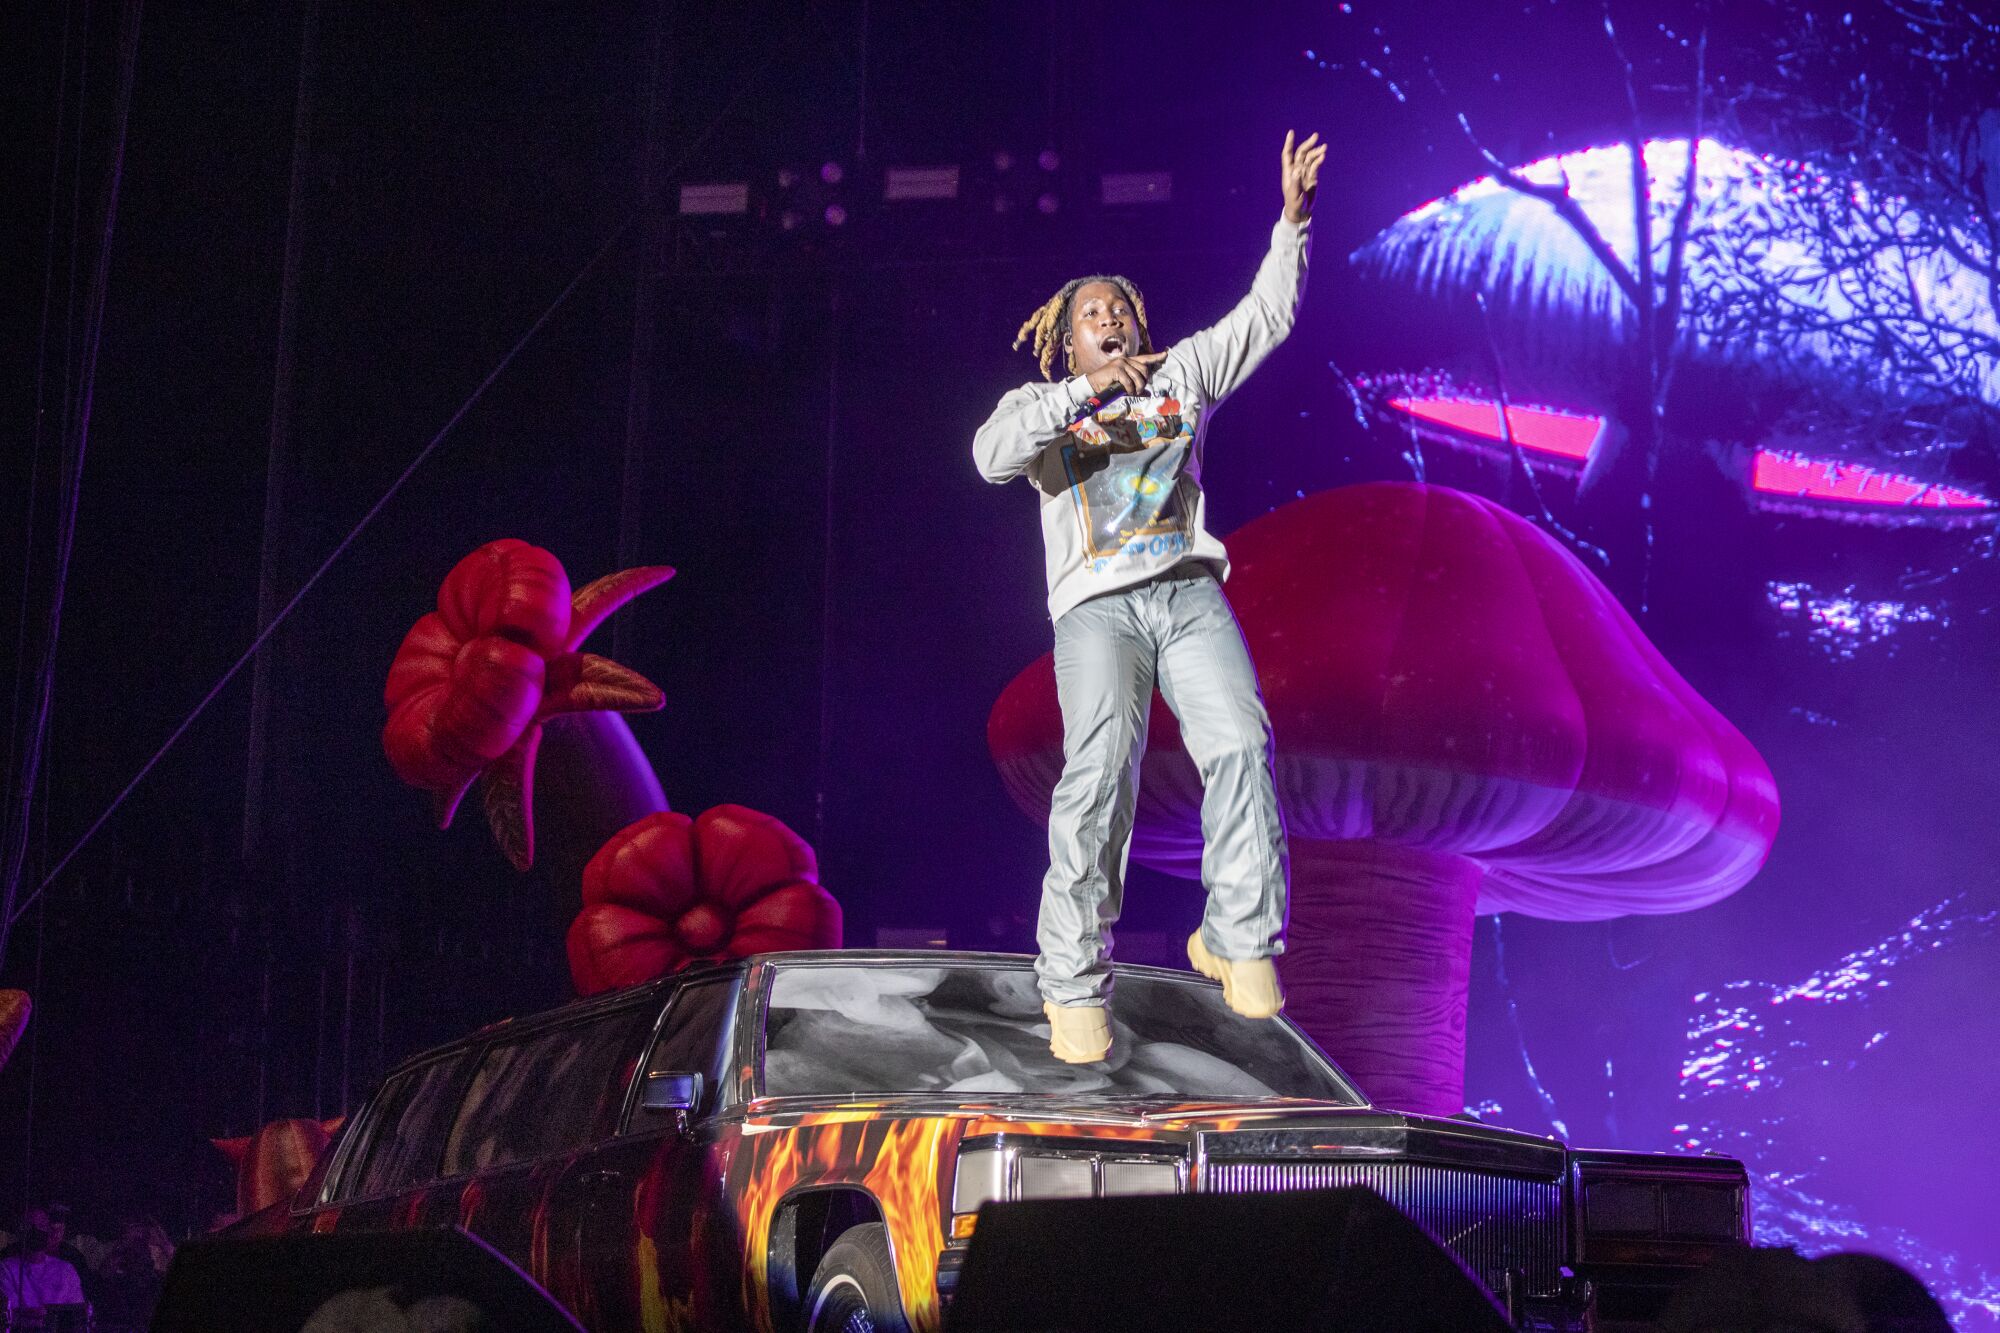 A man jumps on a car onstage with a giant mushroom and flowers in the background